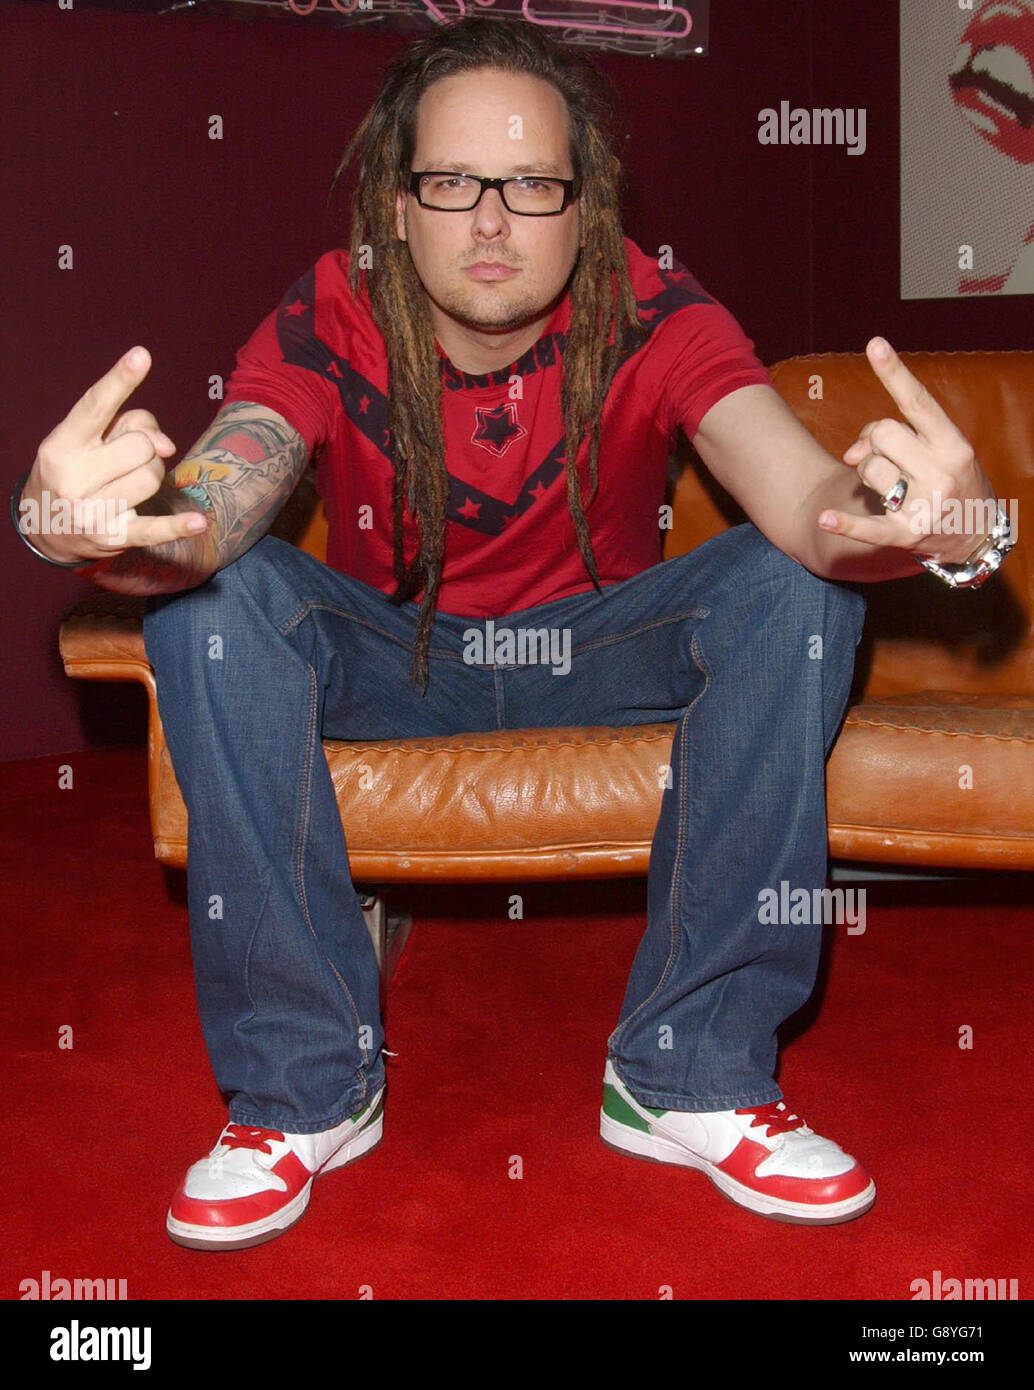 Jonathan Davis of the band Korn, during his guest appearance on MTV's TRL (Total Request Live) show, live from the MTV studios, Leicester Square, central London, Friday 21 October 2005. PRESS ASSOCIATION Photo. Photo credit should read : Anthony Harvey/PA Stock Photo